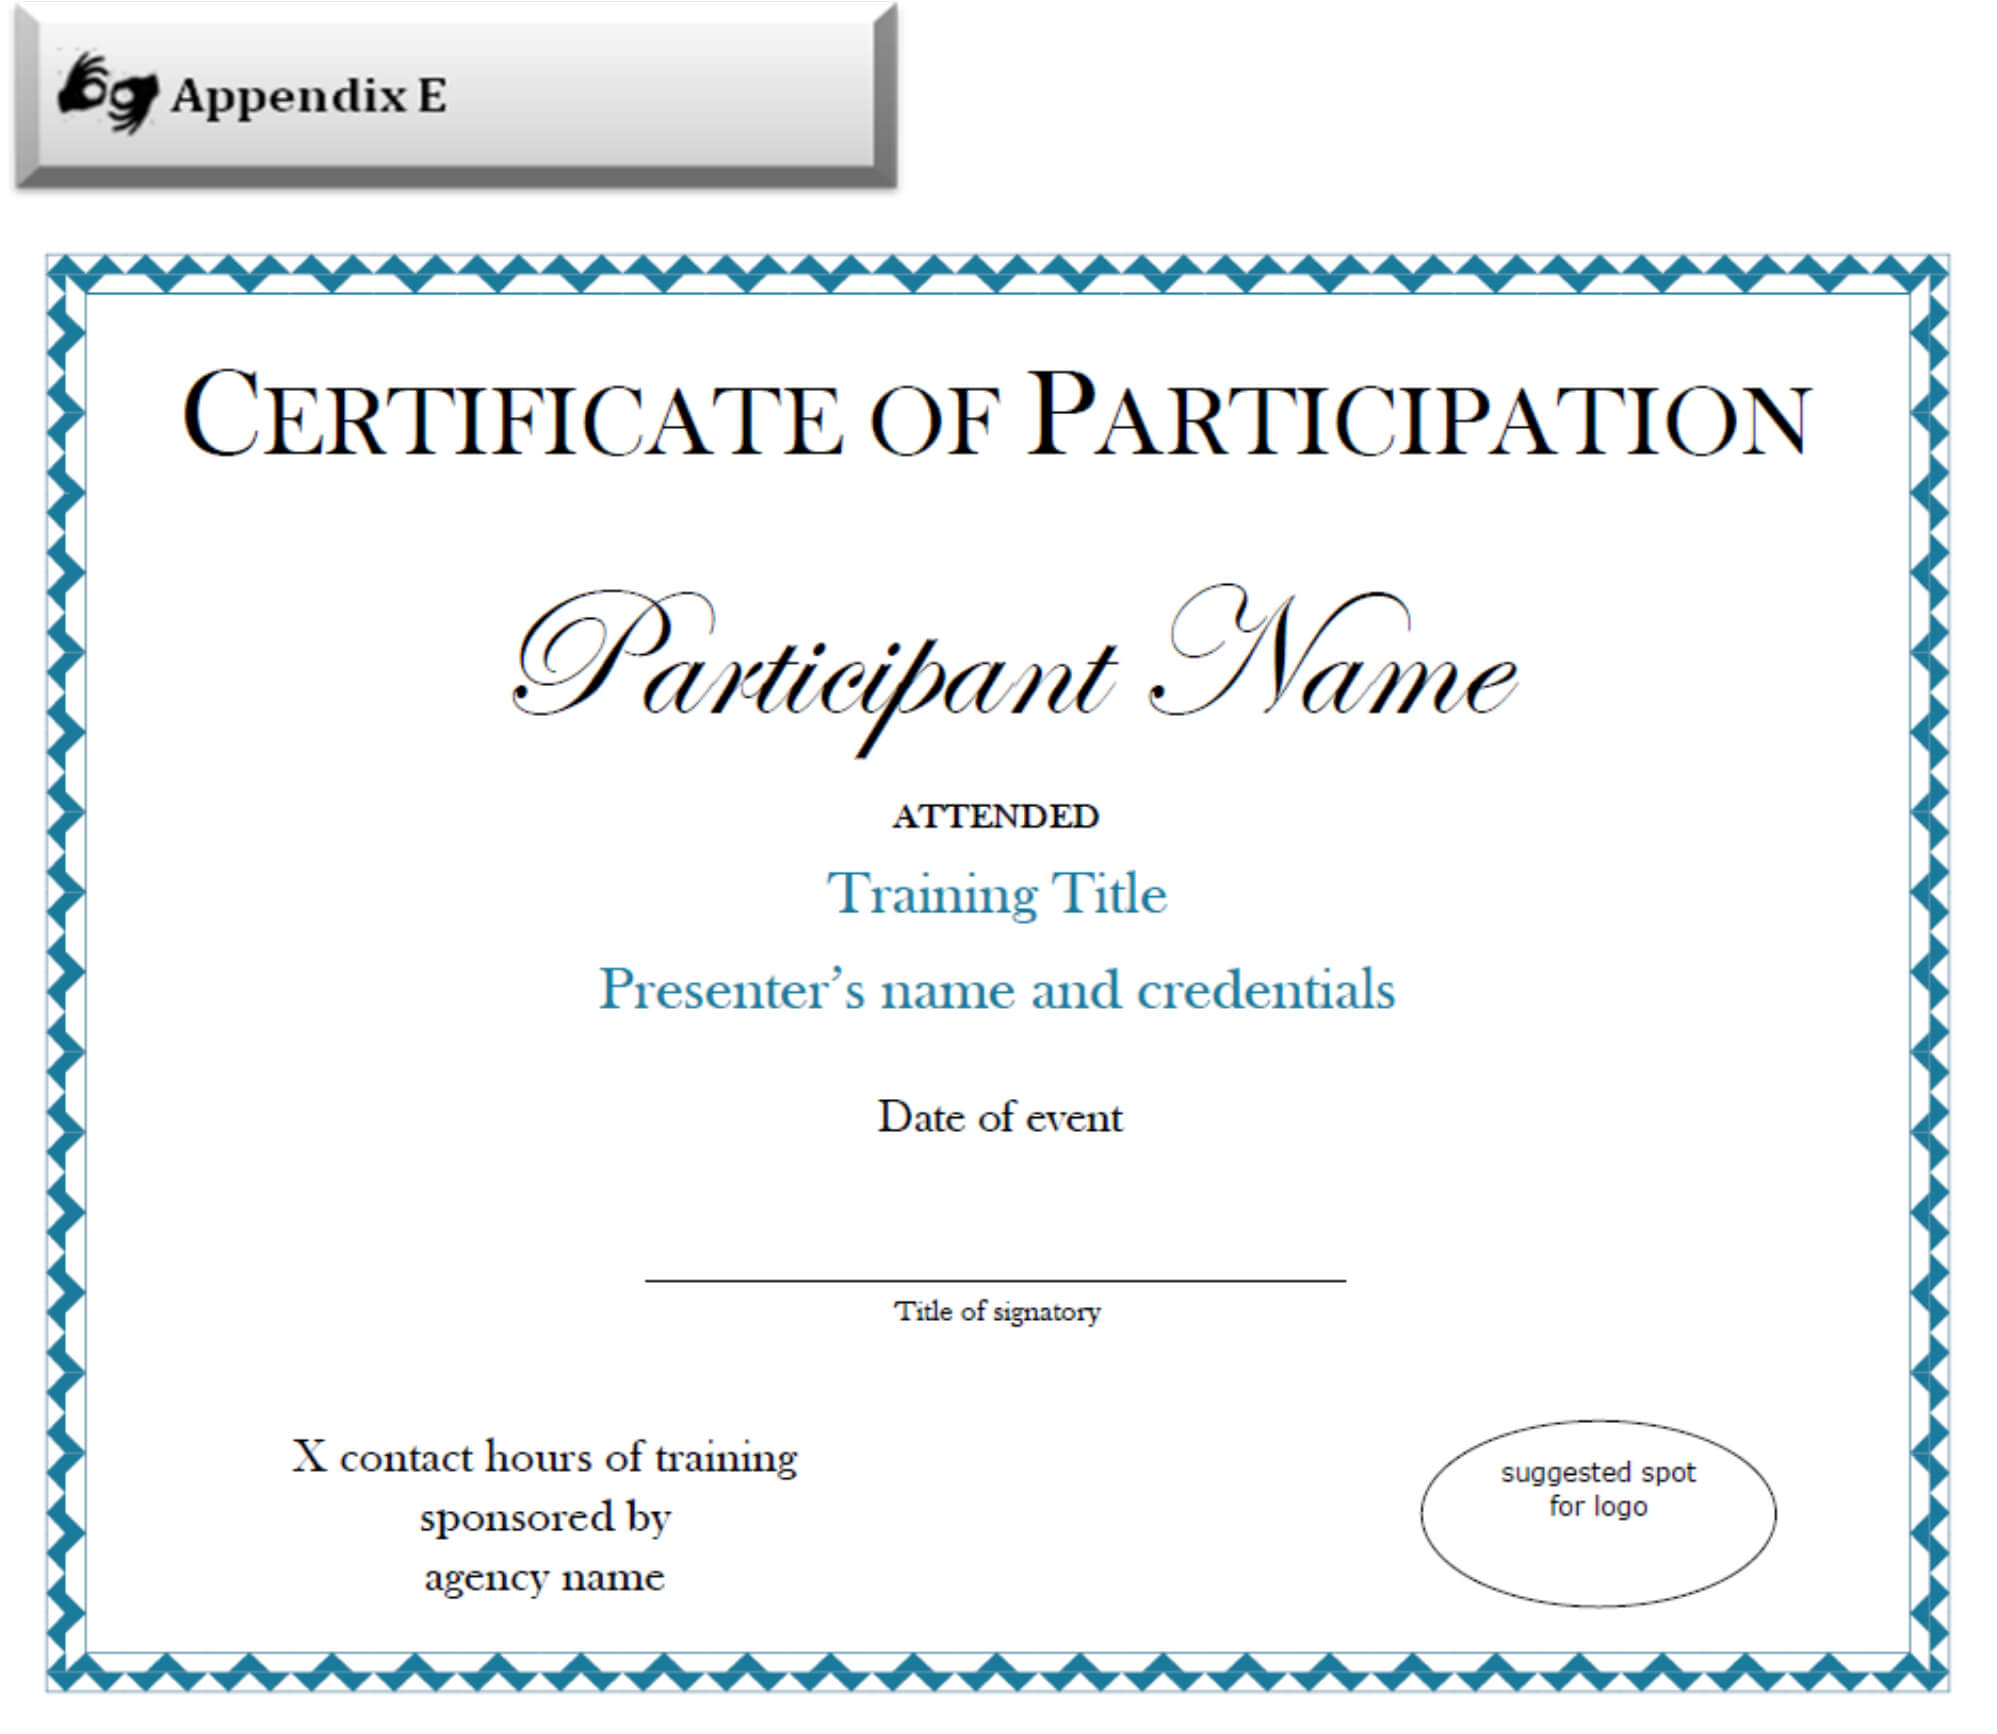 Certificate Of Participation Sample Free Download Throughout Certification Of Participation Free Template